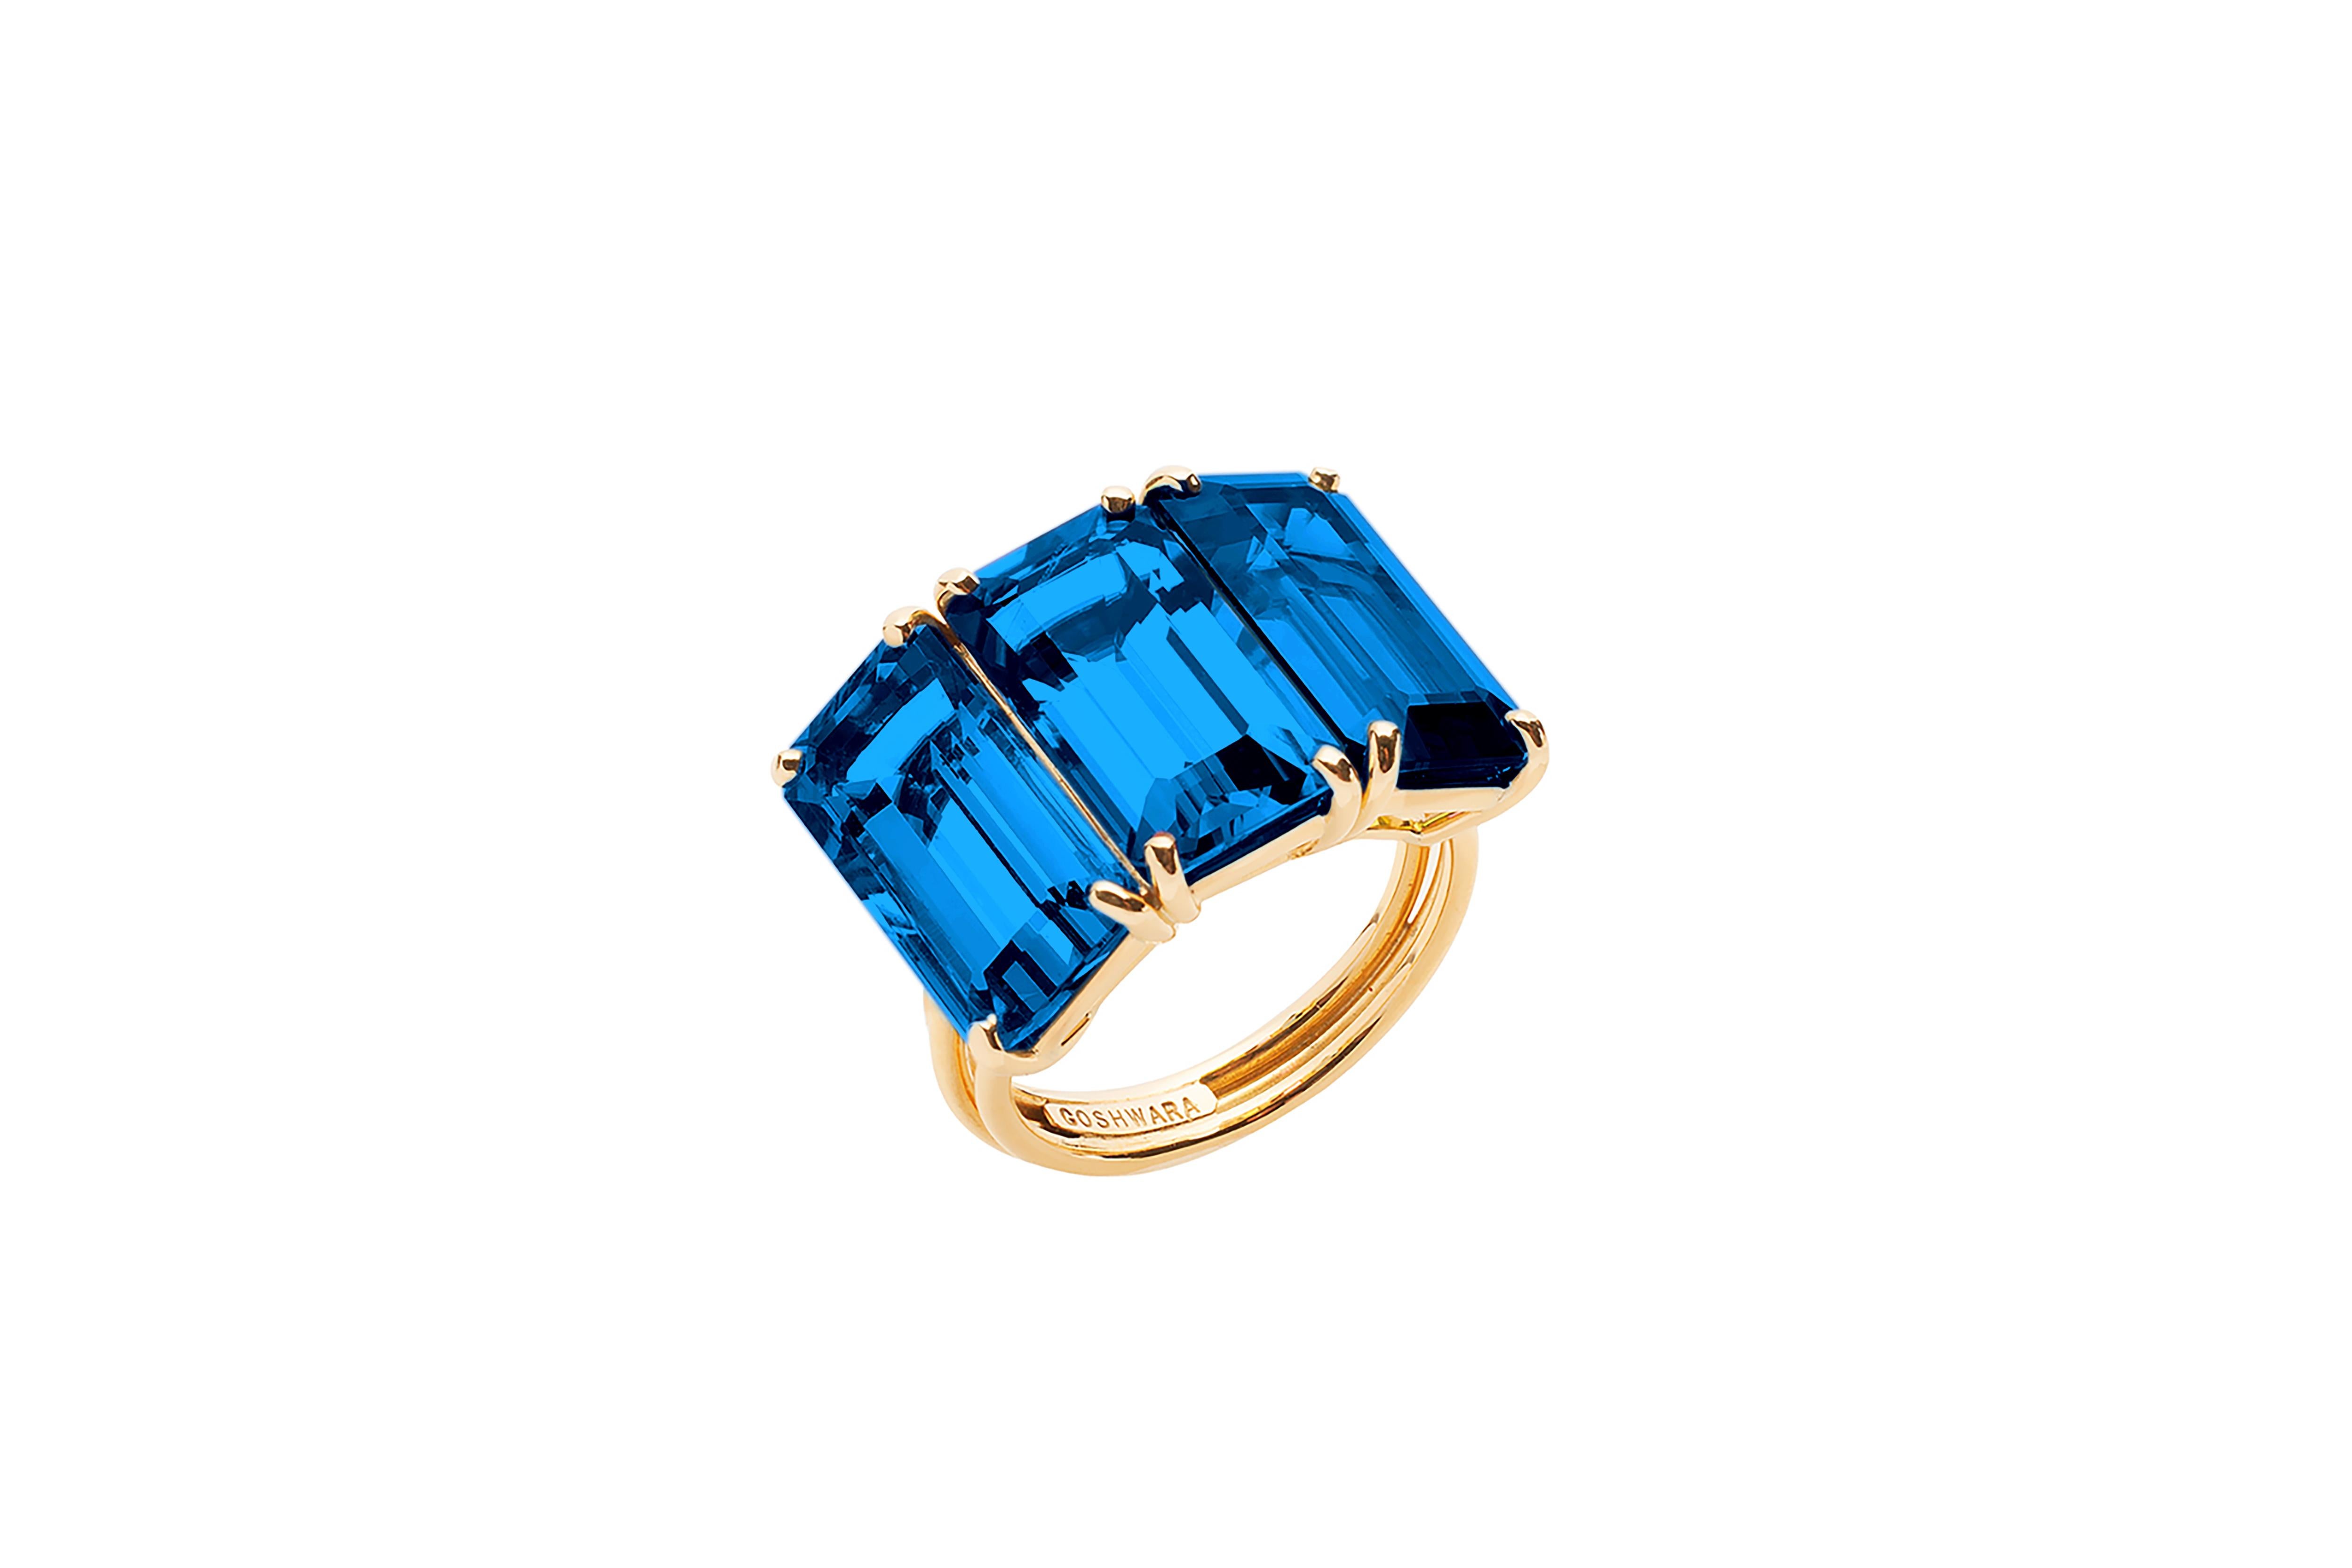 Introducing the exquisite 'Gossip' Collection's London Blue Topaz 3 Stone Emerald Cut Ring in 18K Yellow Gold. This captivating piece seamlessly blends timeless elegance with contemporary design. The mesmerizing London Blue Topaz gemstones,